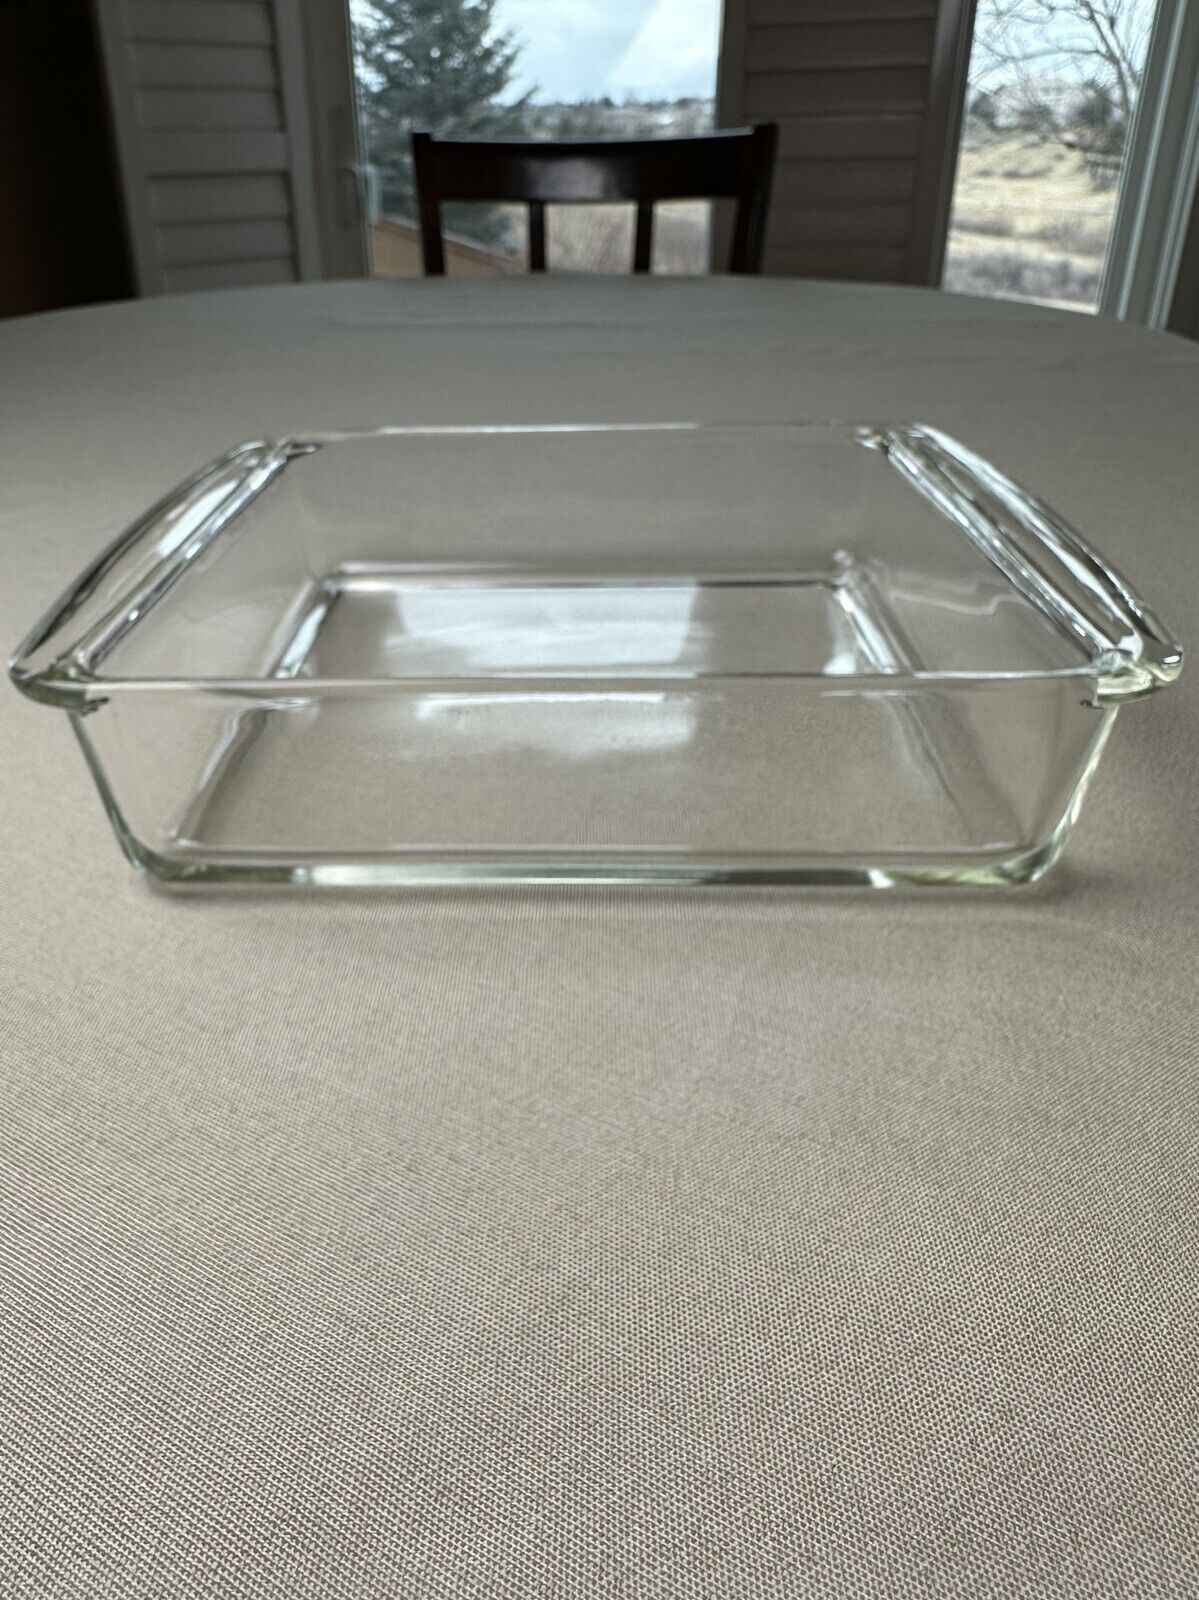 Rare Vintage PYREX 222 Clear Square Casserole Baking Dish 21x21x5 cm - 8x8x2 in